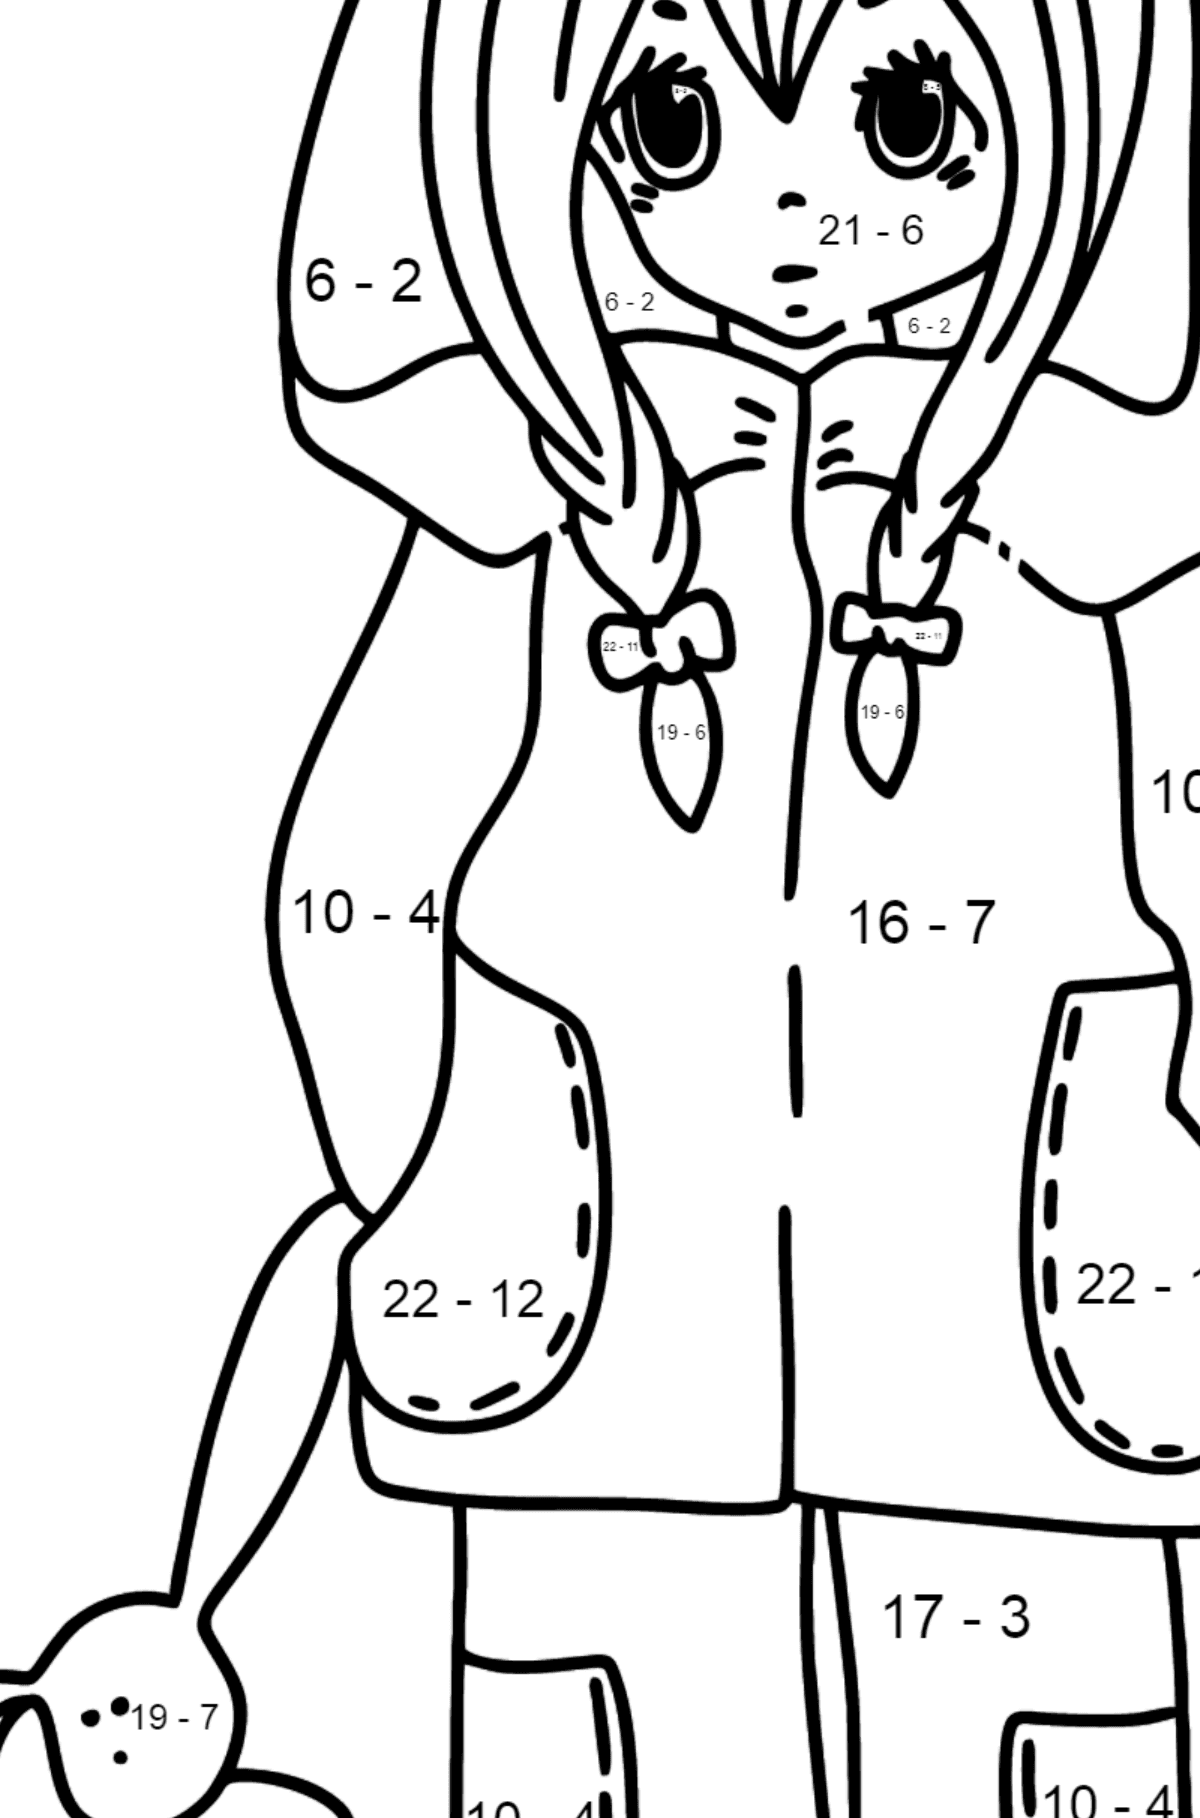 Anime girl with pigtails coloring page - Math Coloring - Subtraction for Kids